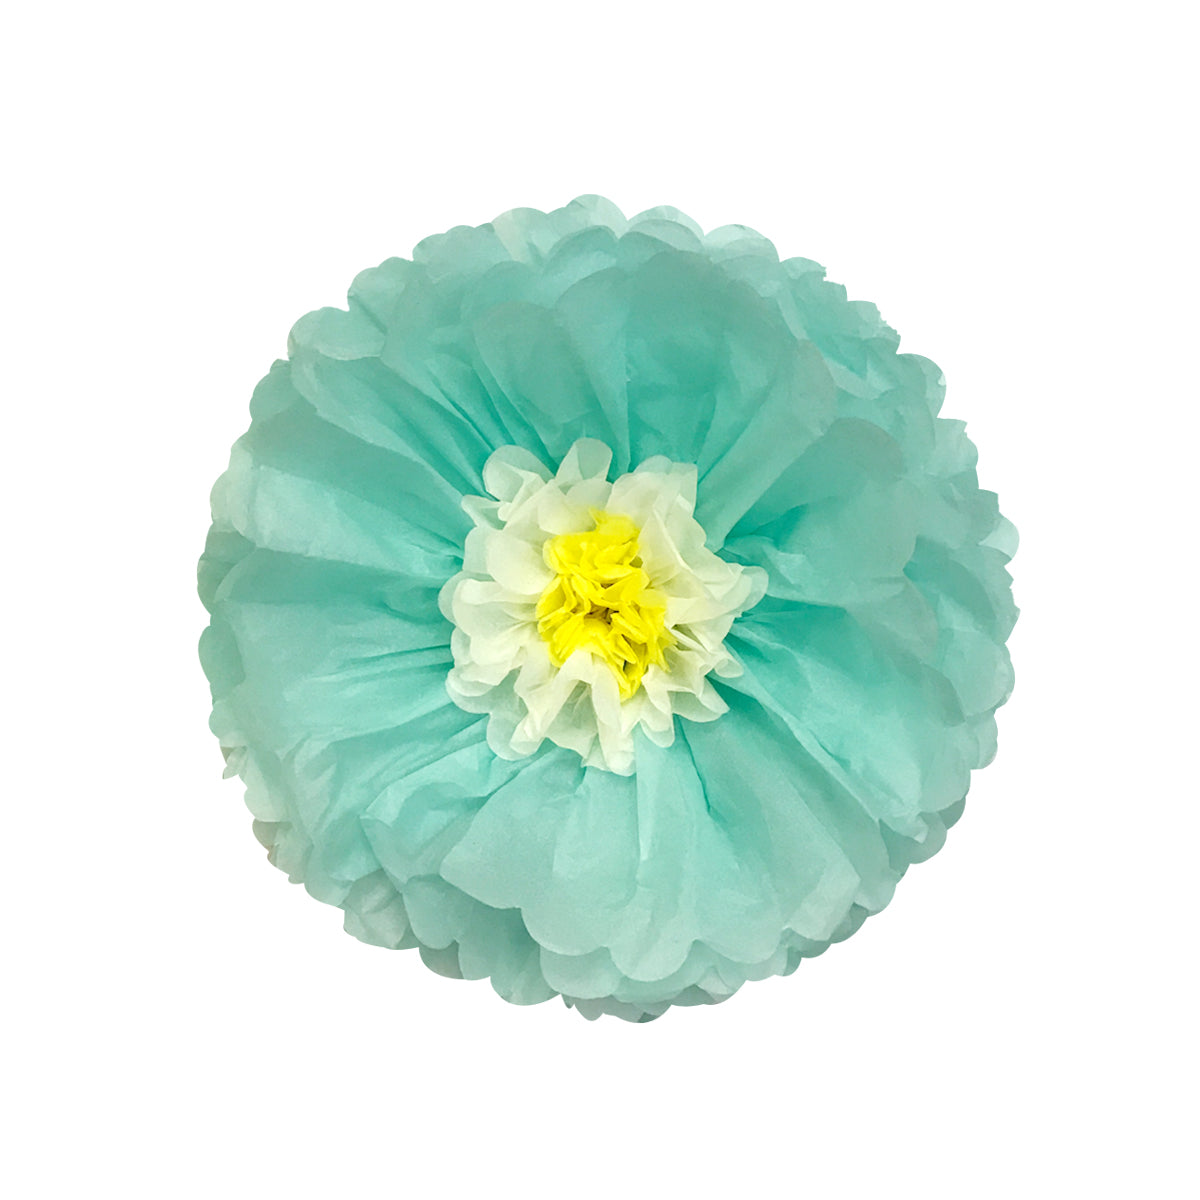 Wrapables Set of 3 Tissue Flower Pom Poms Party Decorations for Weddings, Birthday Parties Baby Showers and Nursery Decor